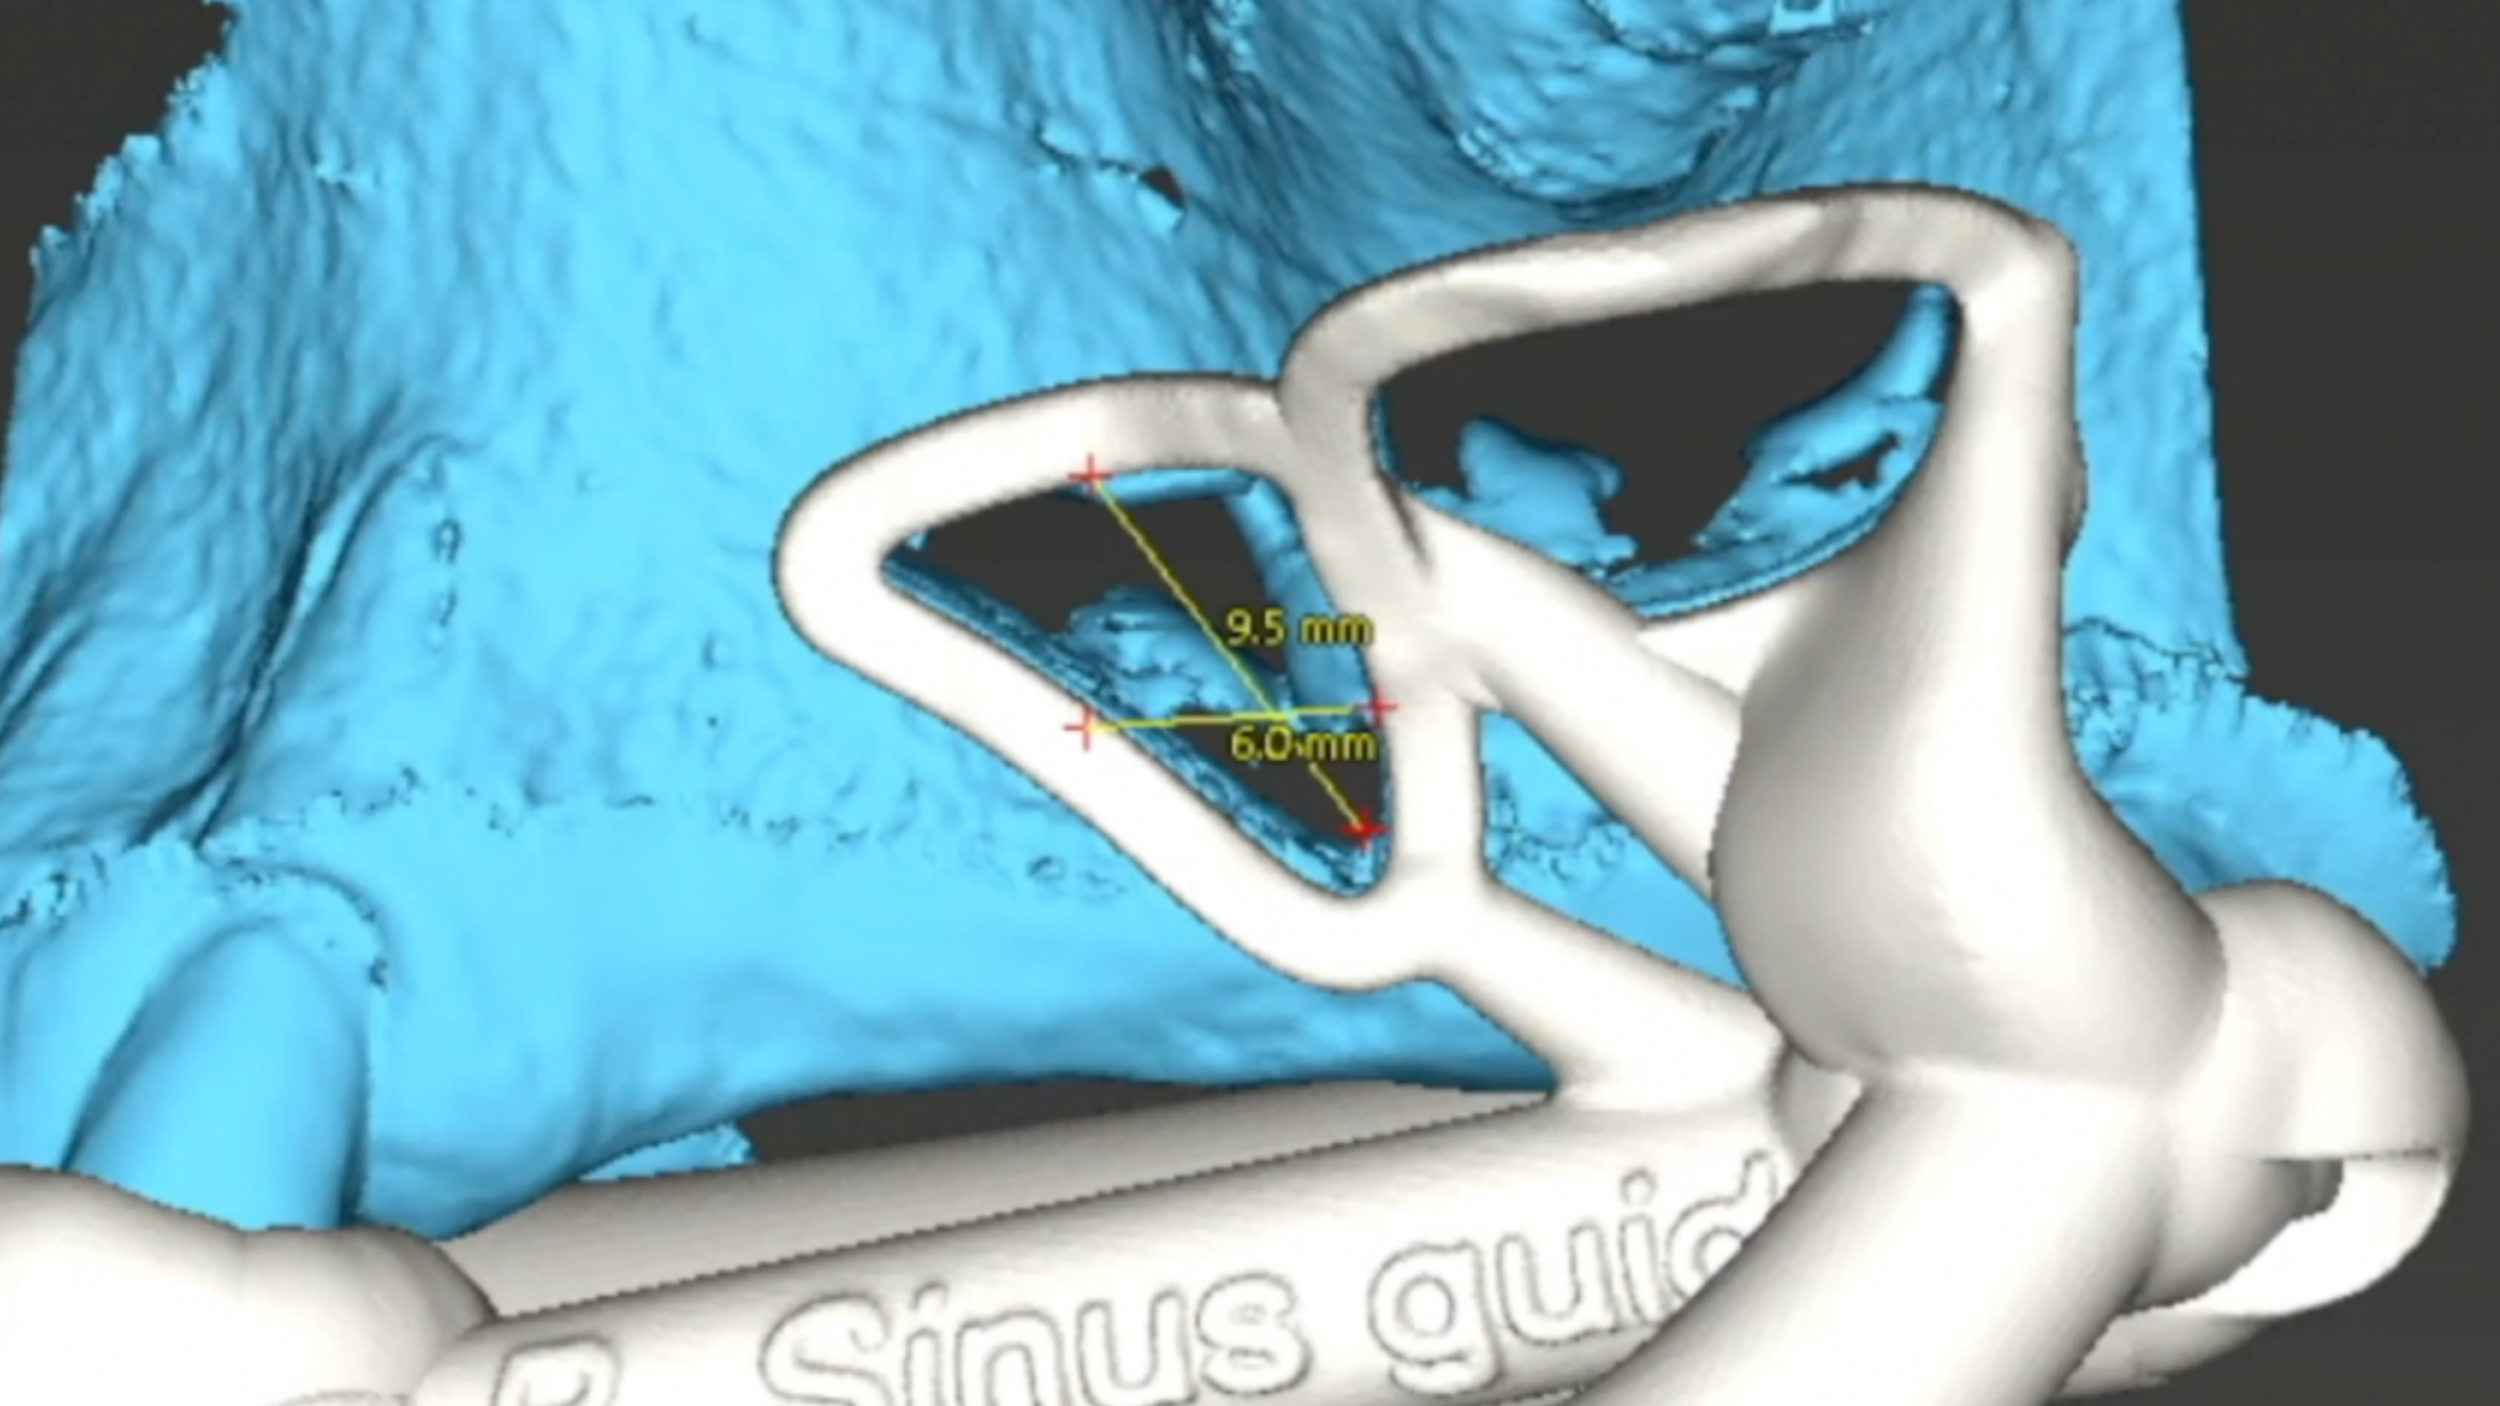 A Step-by-Step Digital Workflow to Design a 3D Printed Sinus Window and Septum Surgical Guide